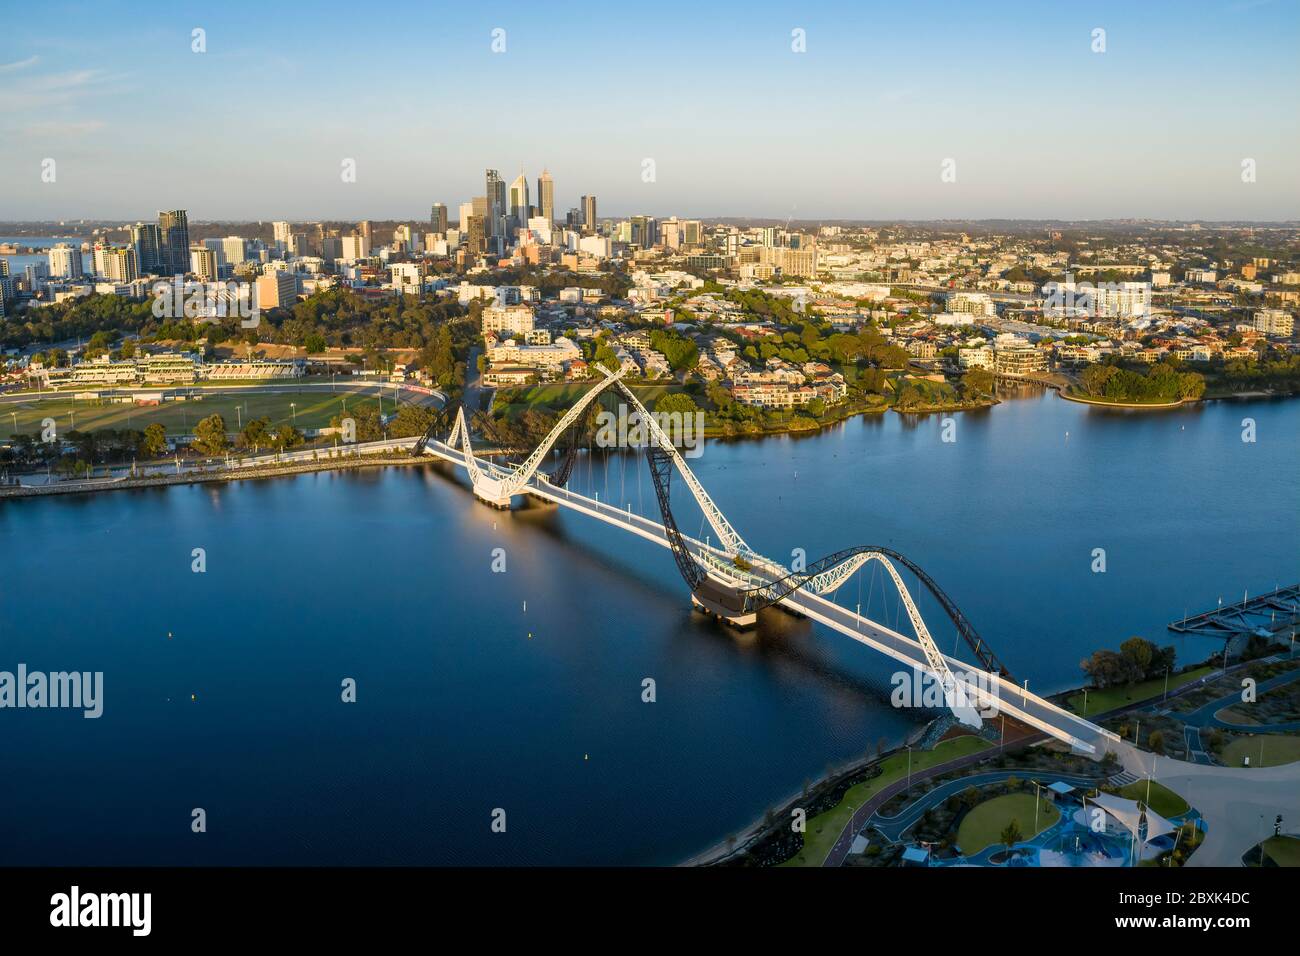 Perth Australia November 5th 2019: Aerial view of Matagarup bridge with the city of Perth, Western Australia in the background Stock Photo